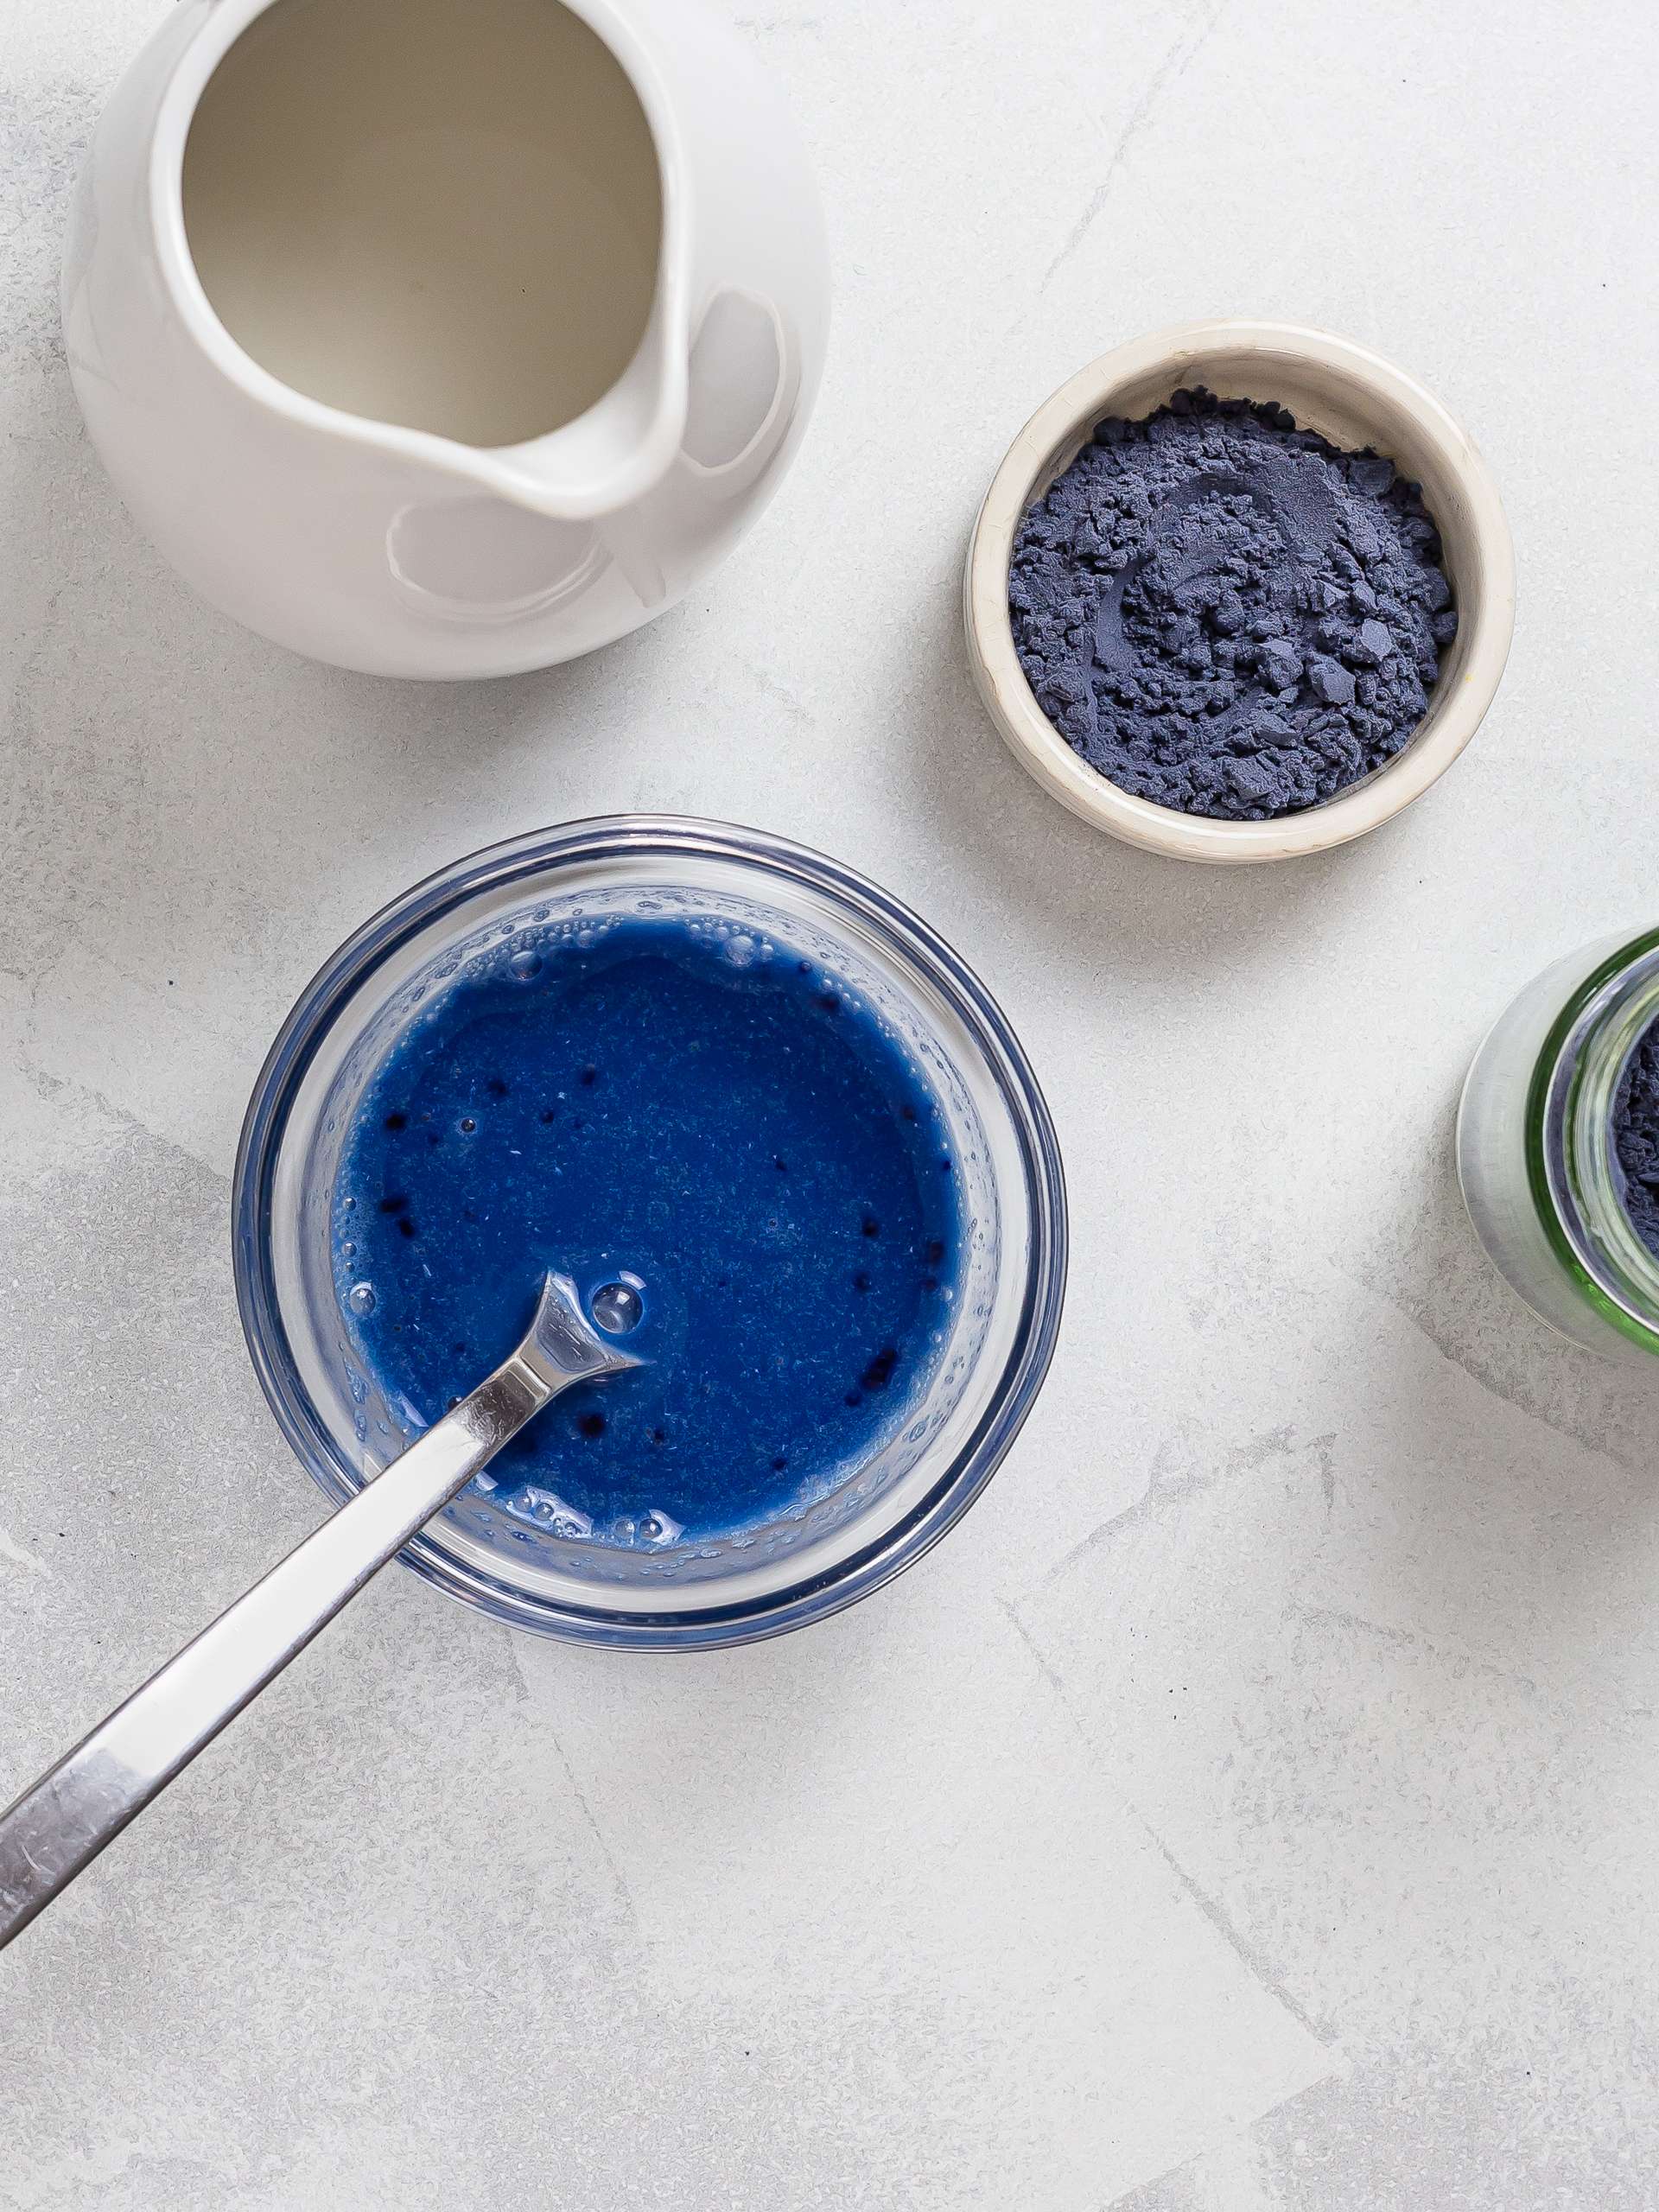 butterfly pea powder mixed with milk